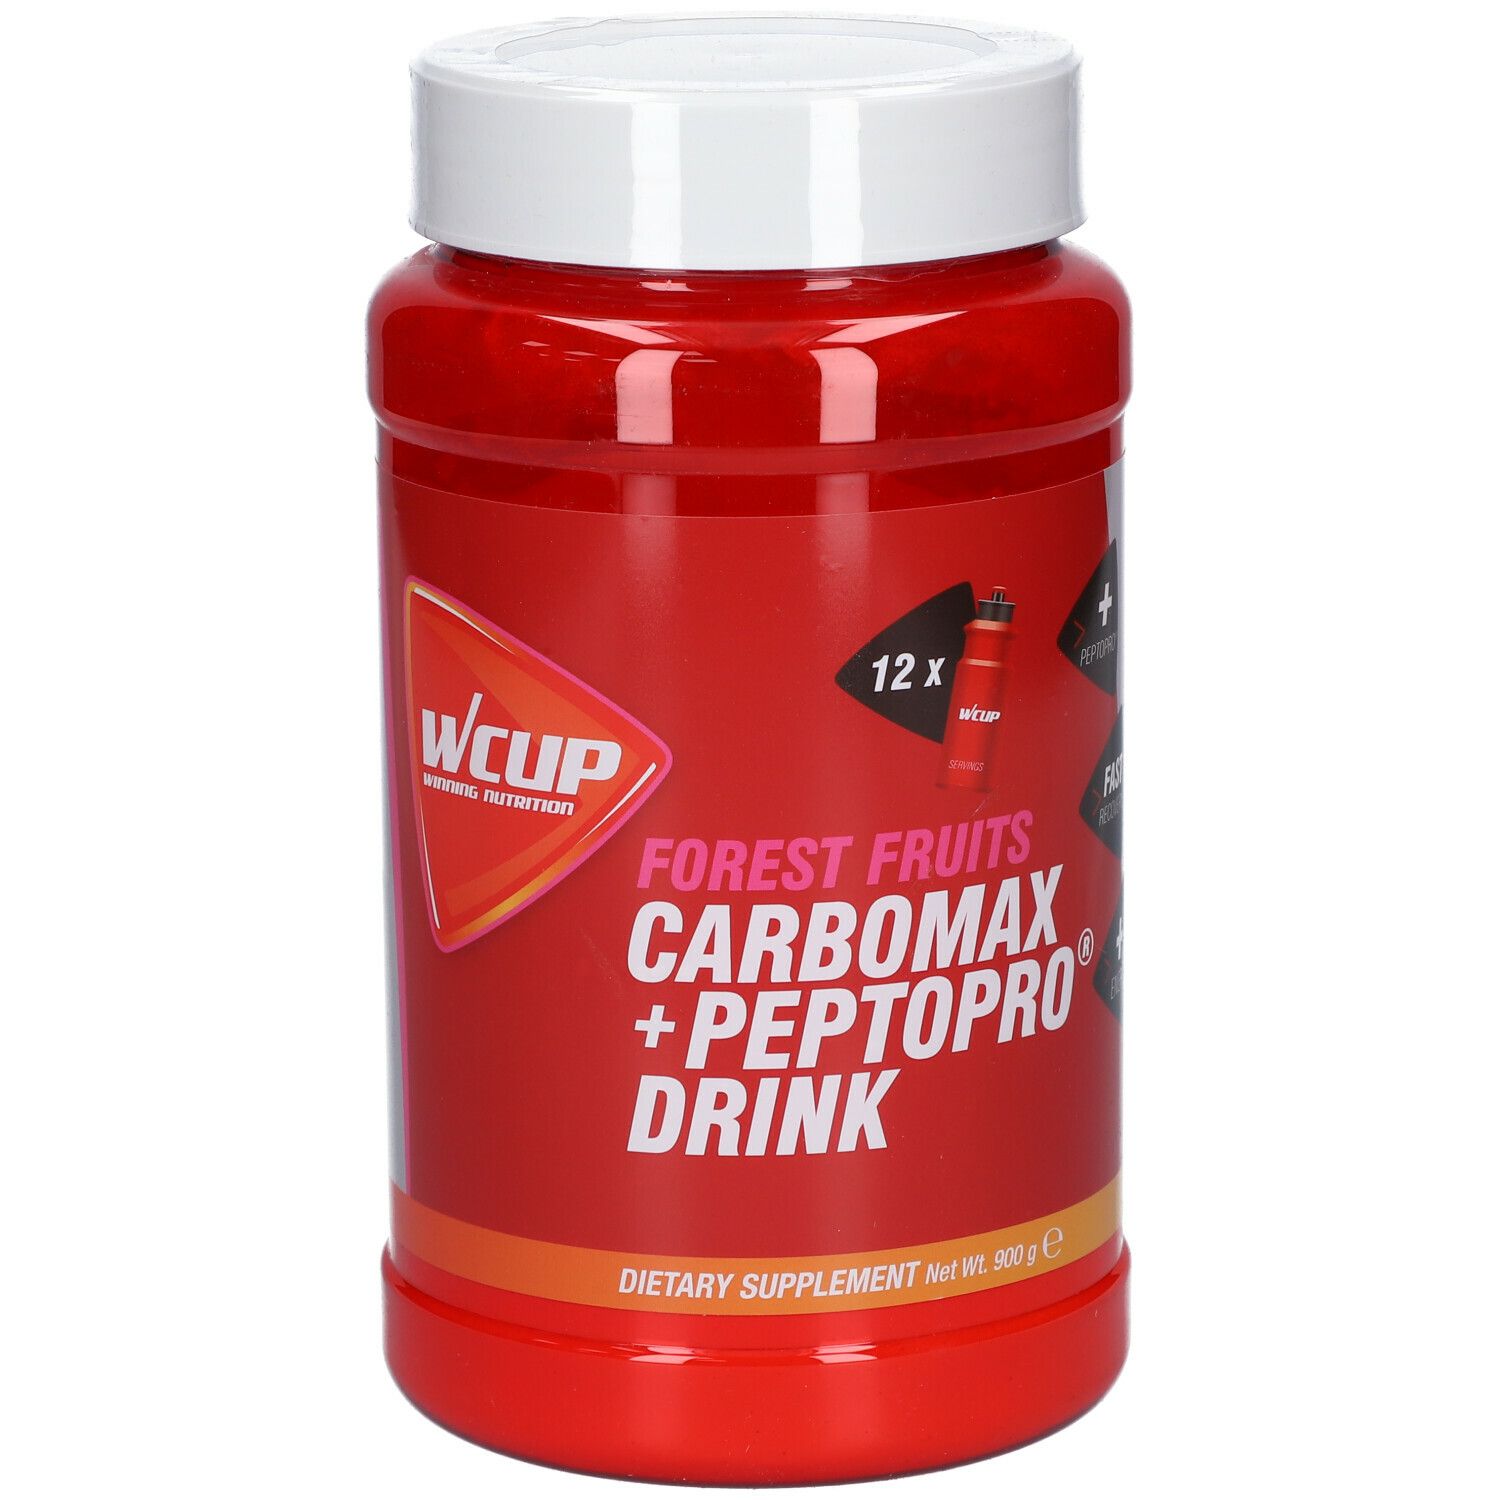 Image of Wcup Carbomax + Preptopro® Drink Waldbeere